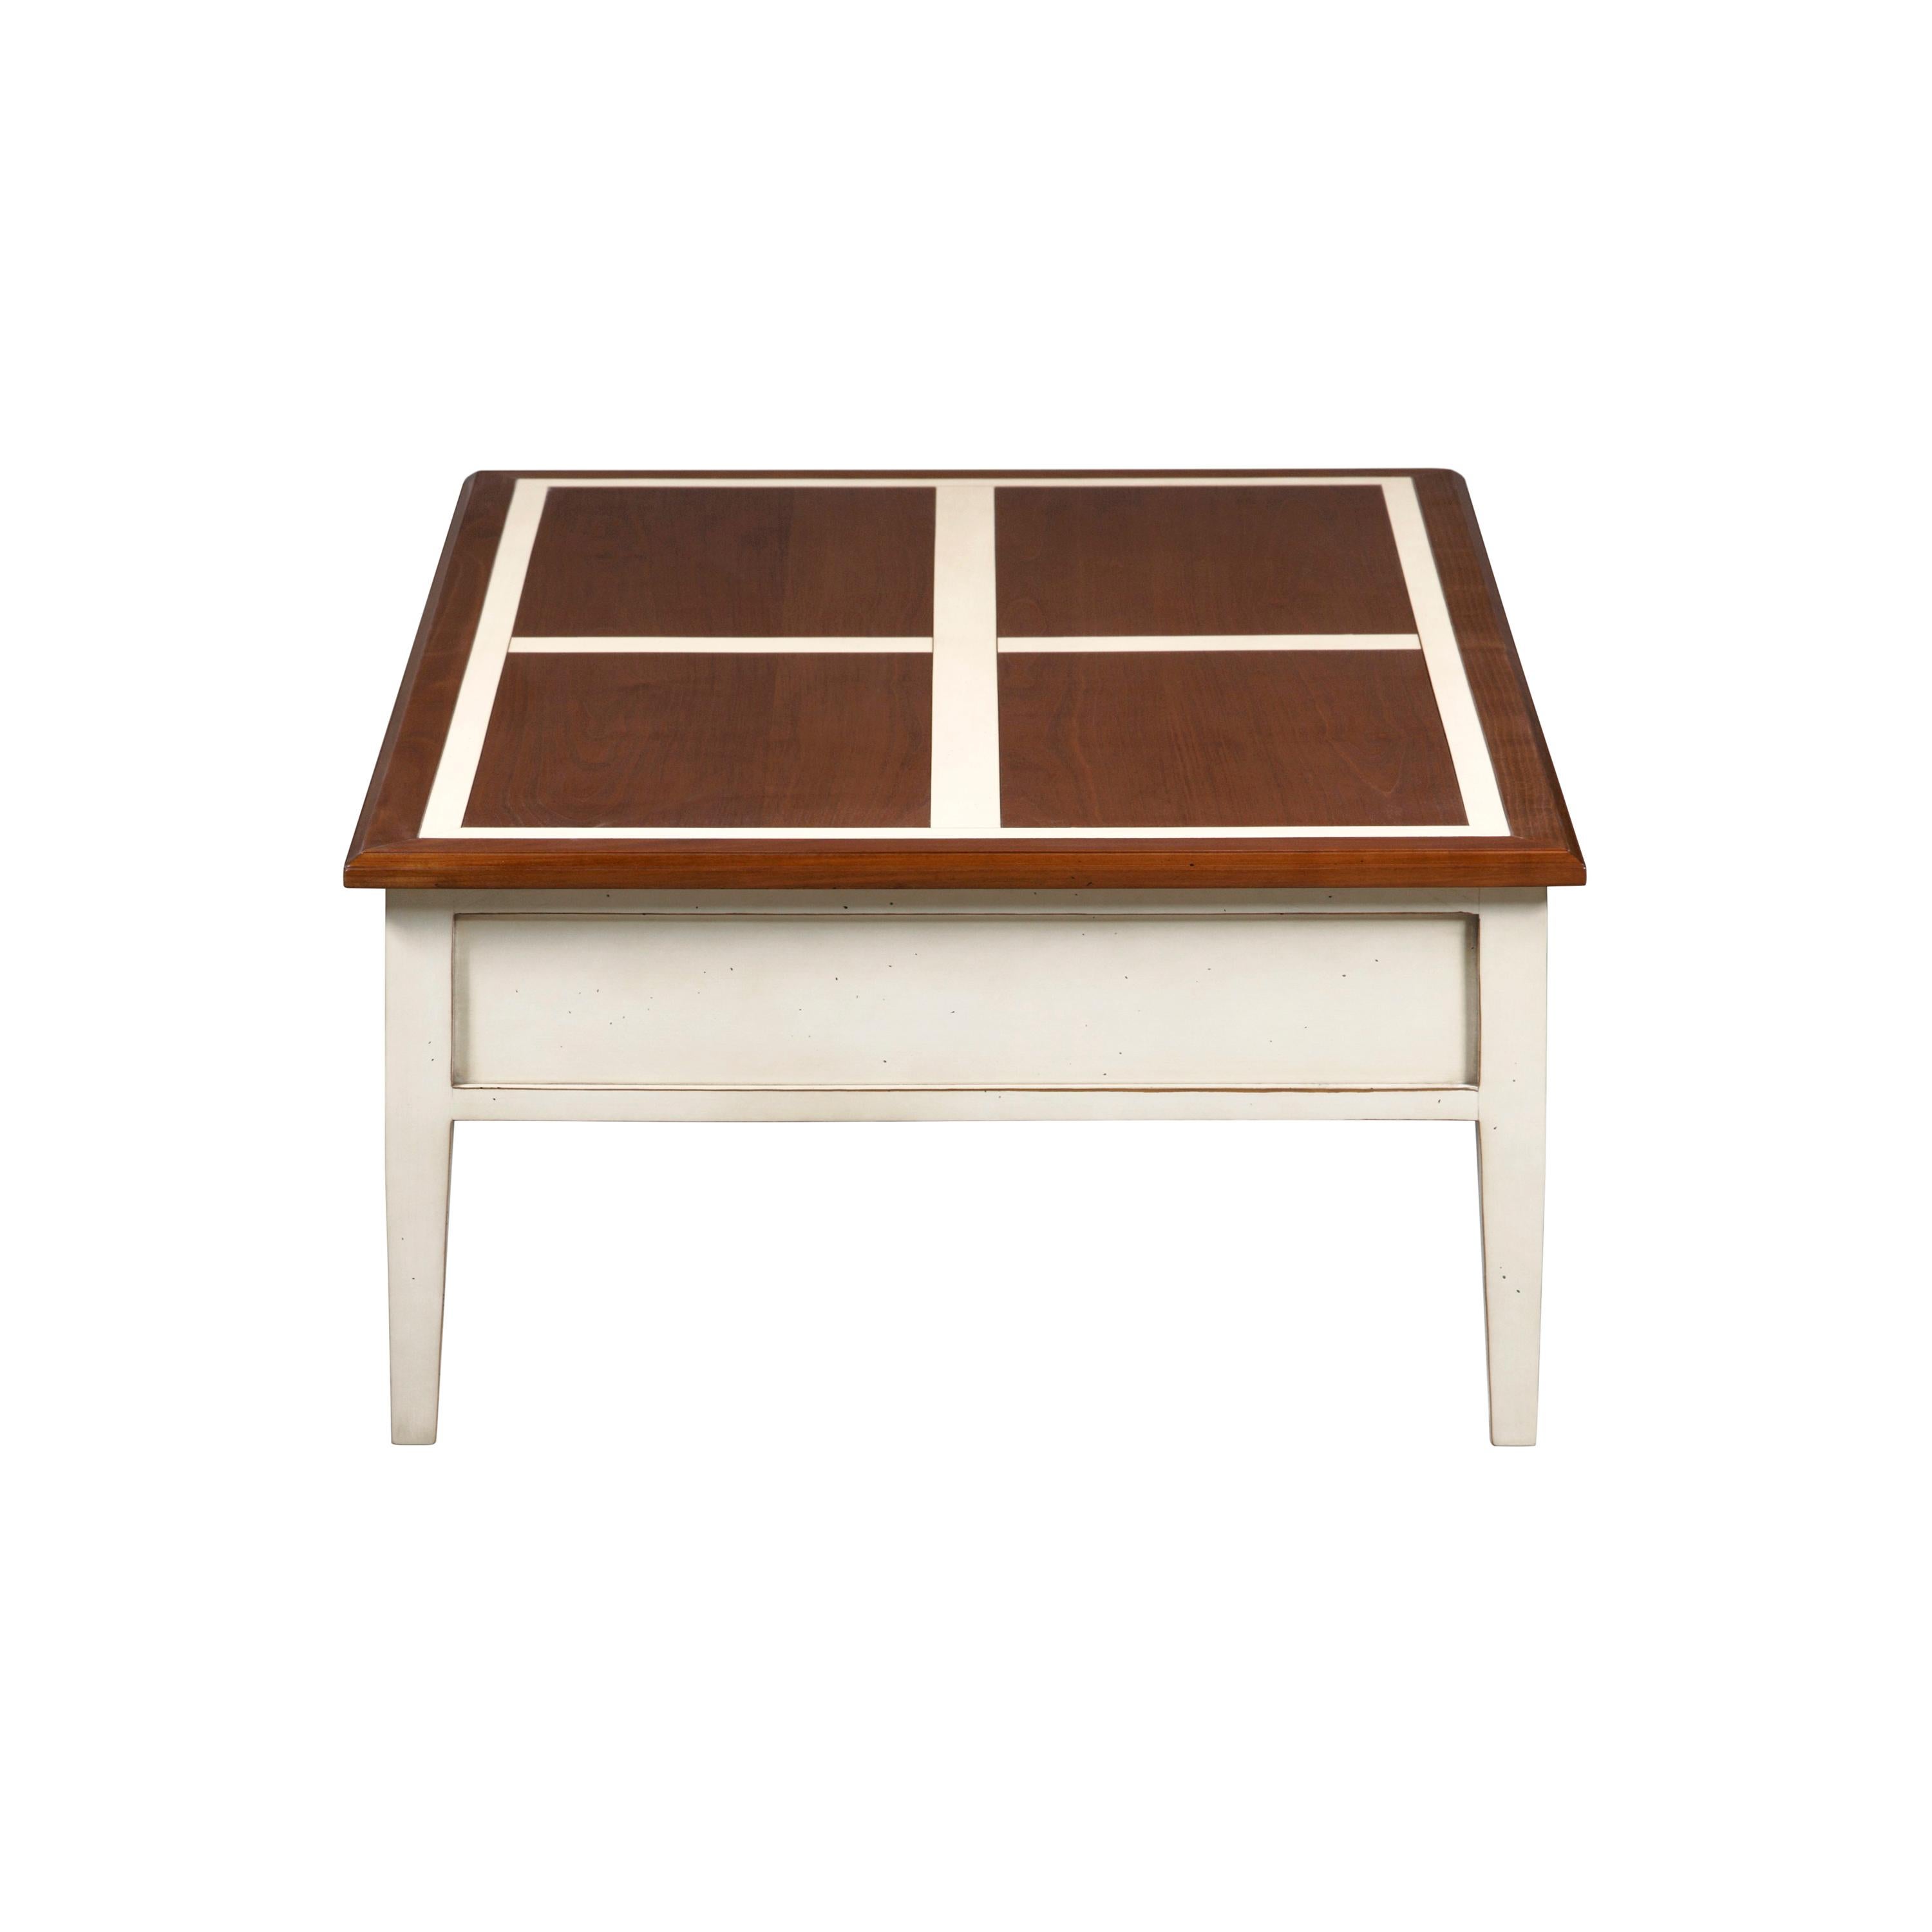 2-Drawer Coffee Table in Cherry, a French Directoire Style Re-Interpretation  For Sale 1